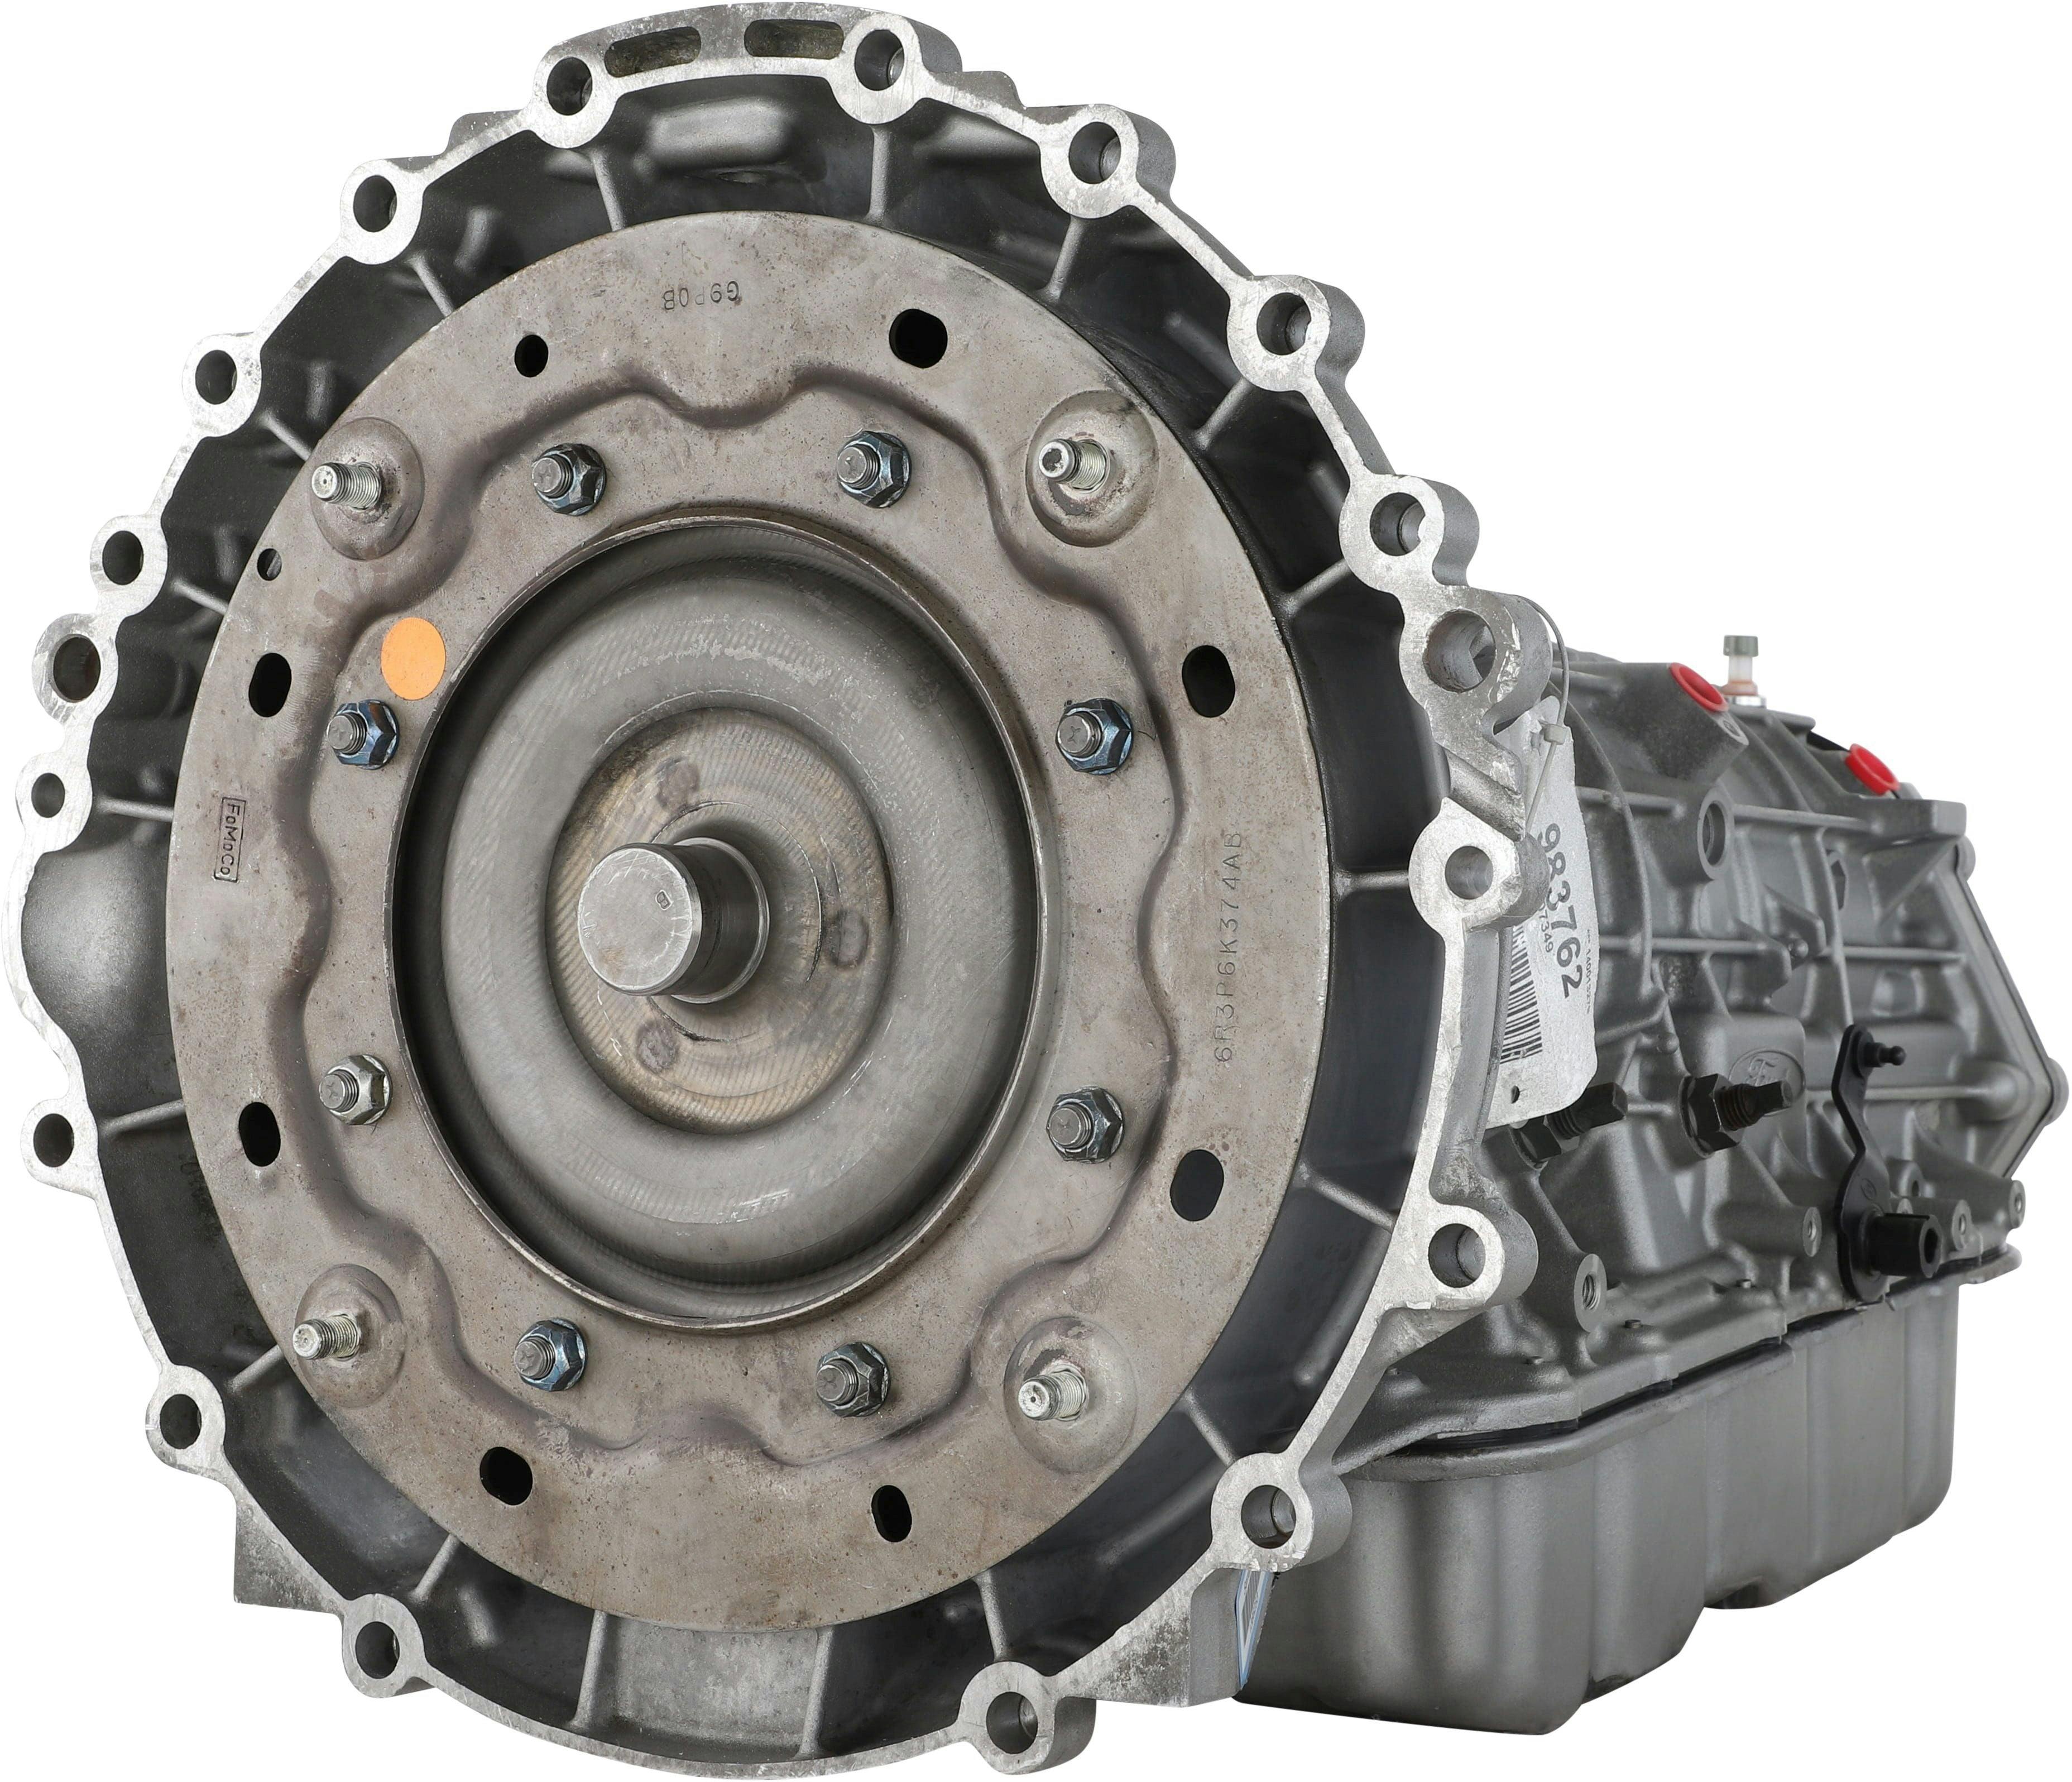 Automatic Transmission for 2003-2006 Ford Thunderbird/Lincoln LS RWD with 3.9L V8 Engine